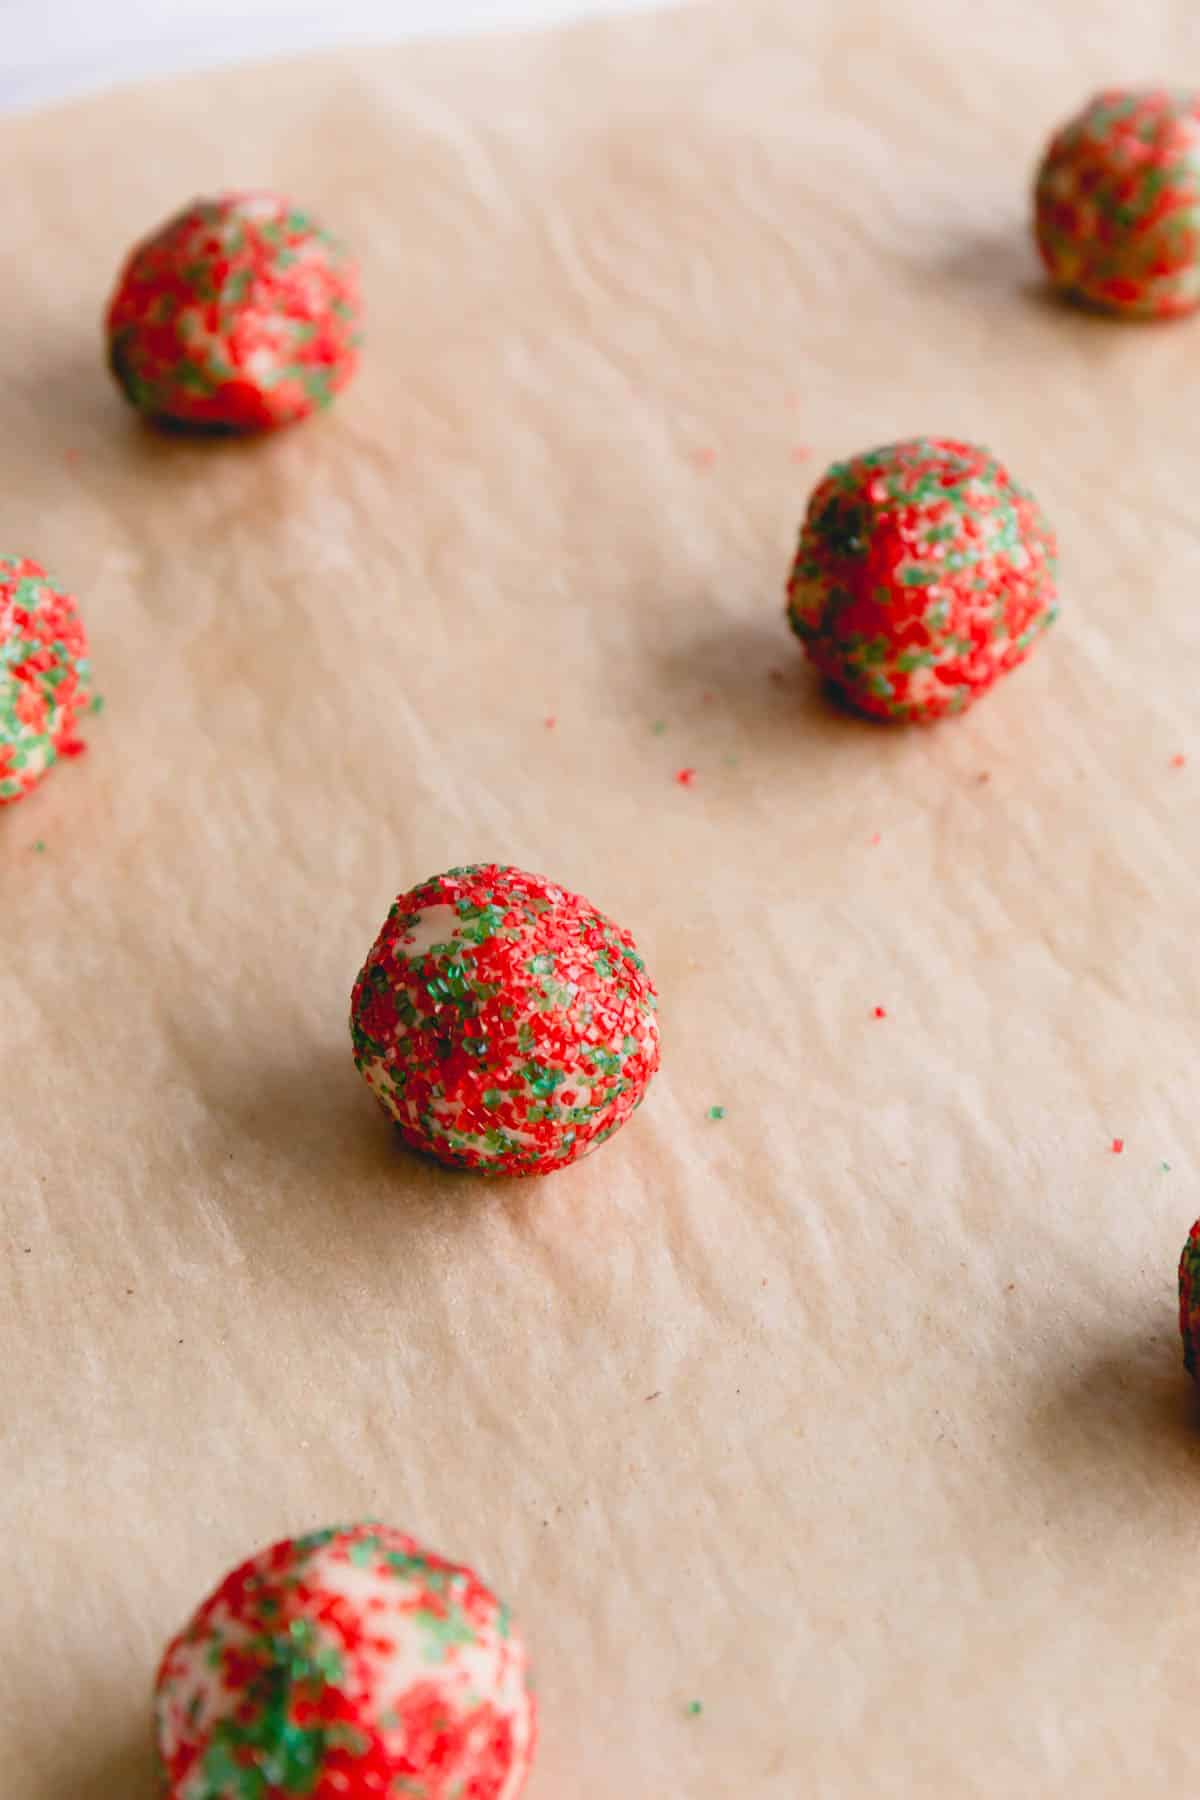 Small cookie dough balls rolled in a red and green sugars.